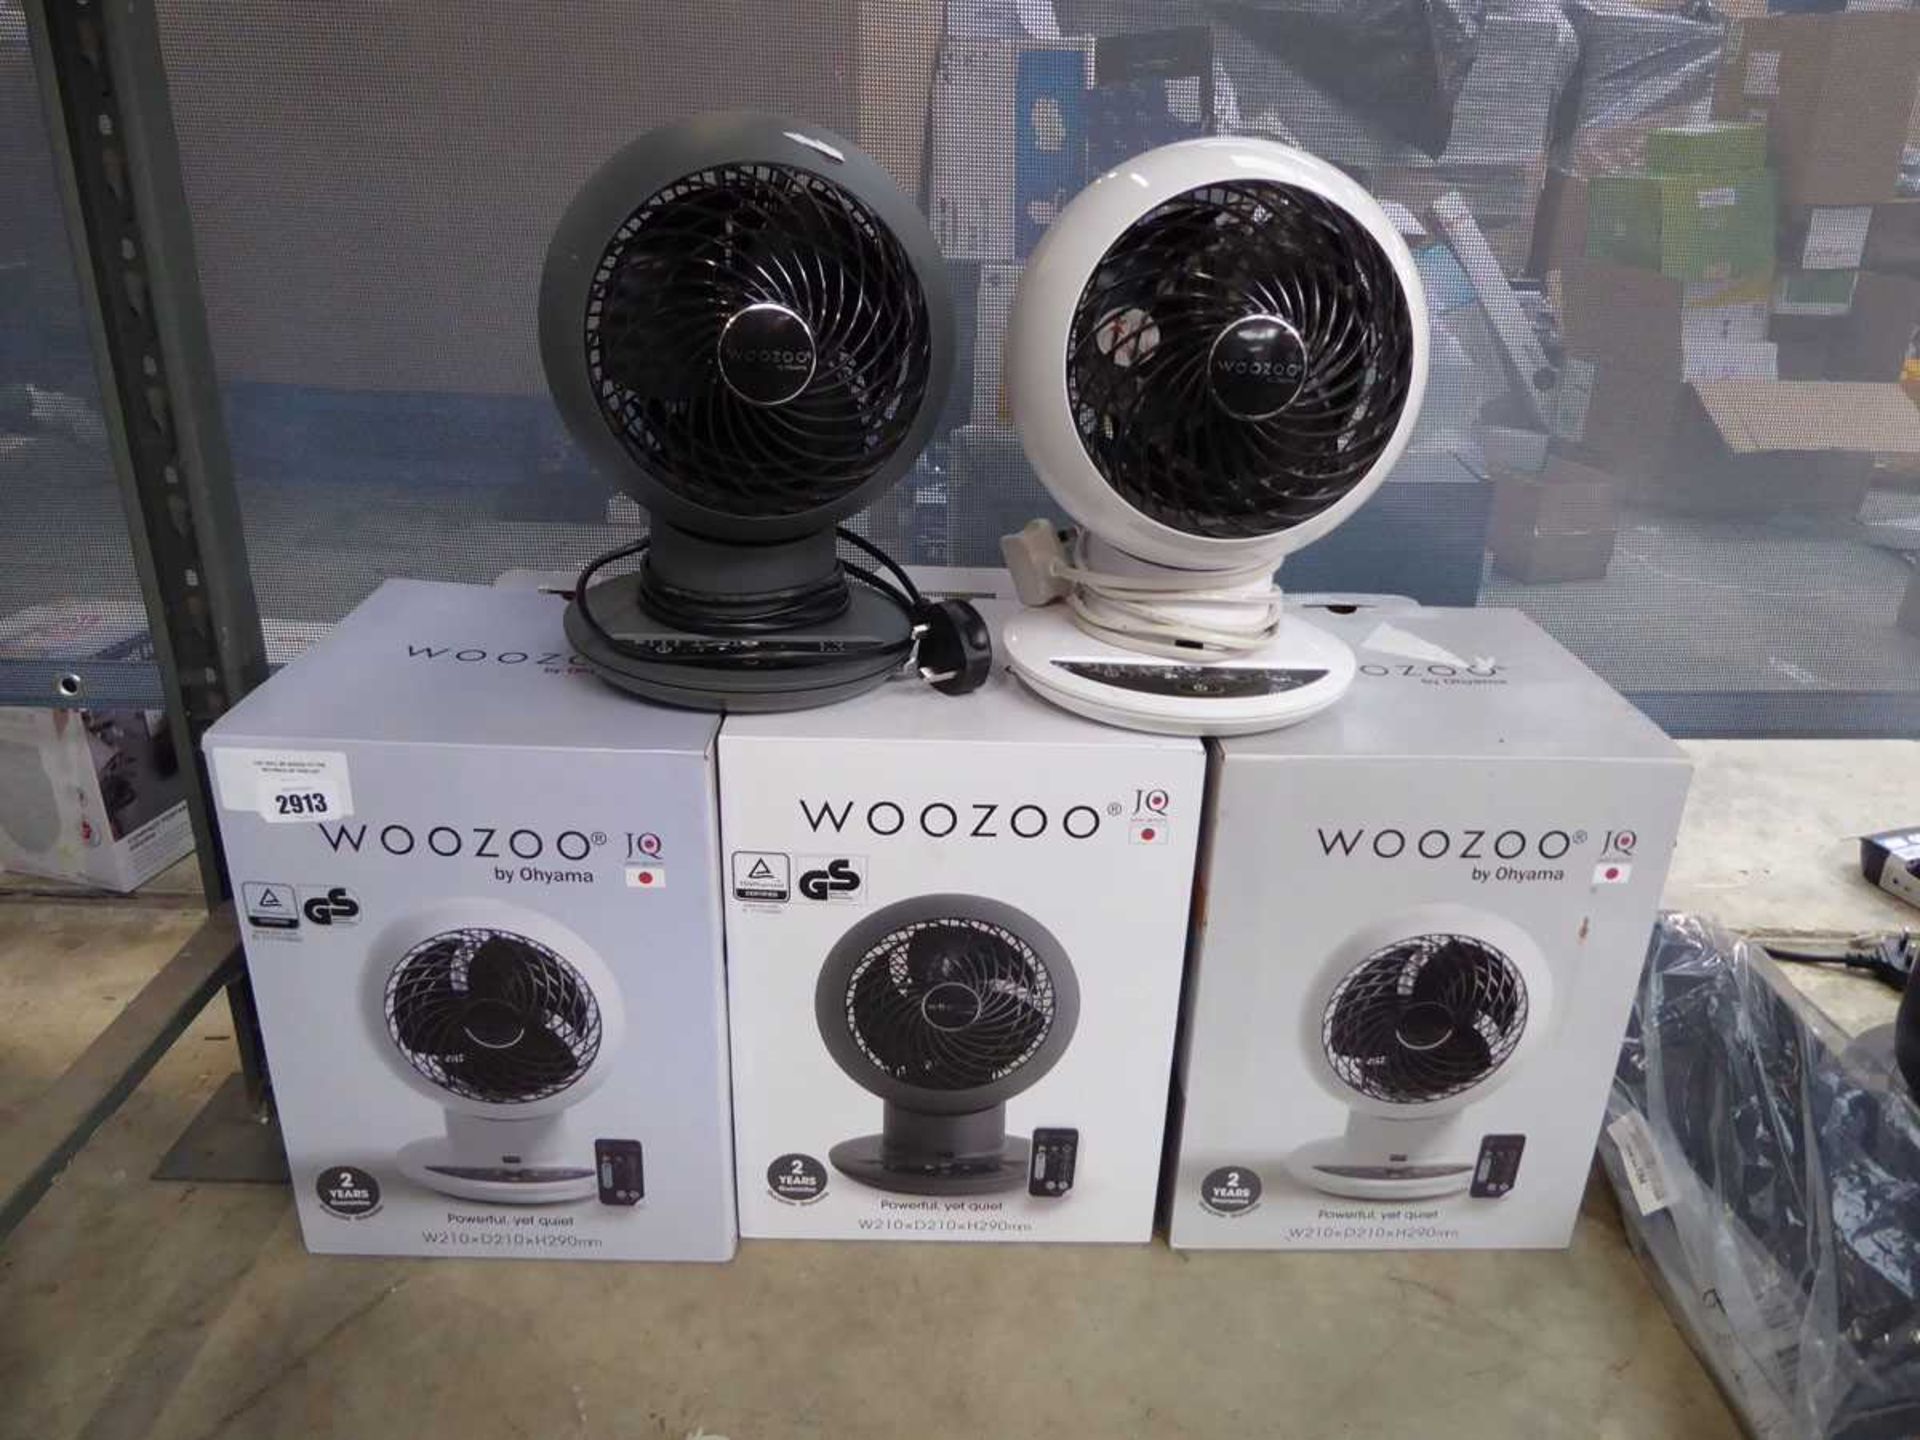 +VAT 3 boxed and 2 unboxed Woozoo fans